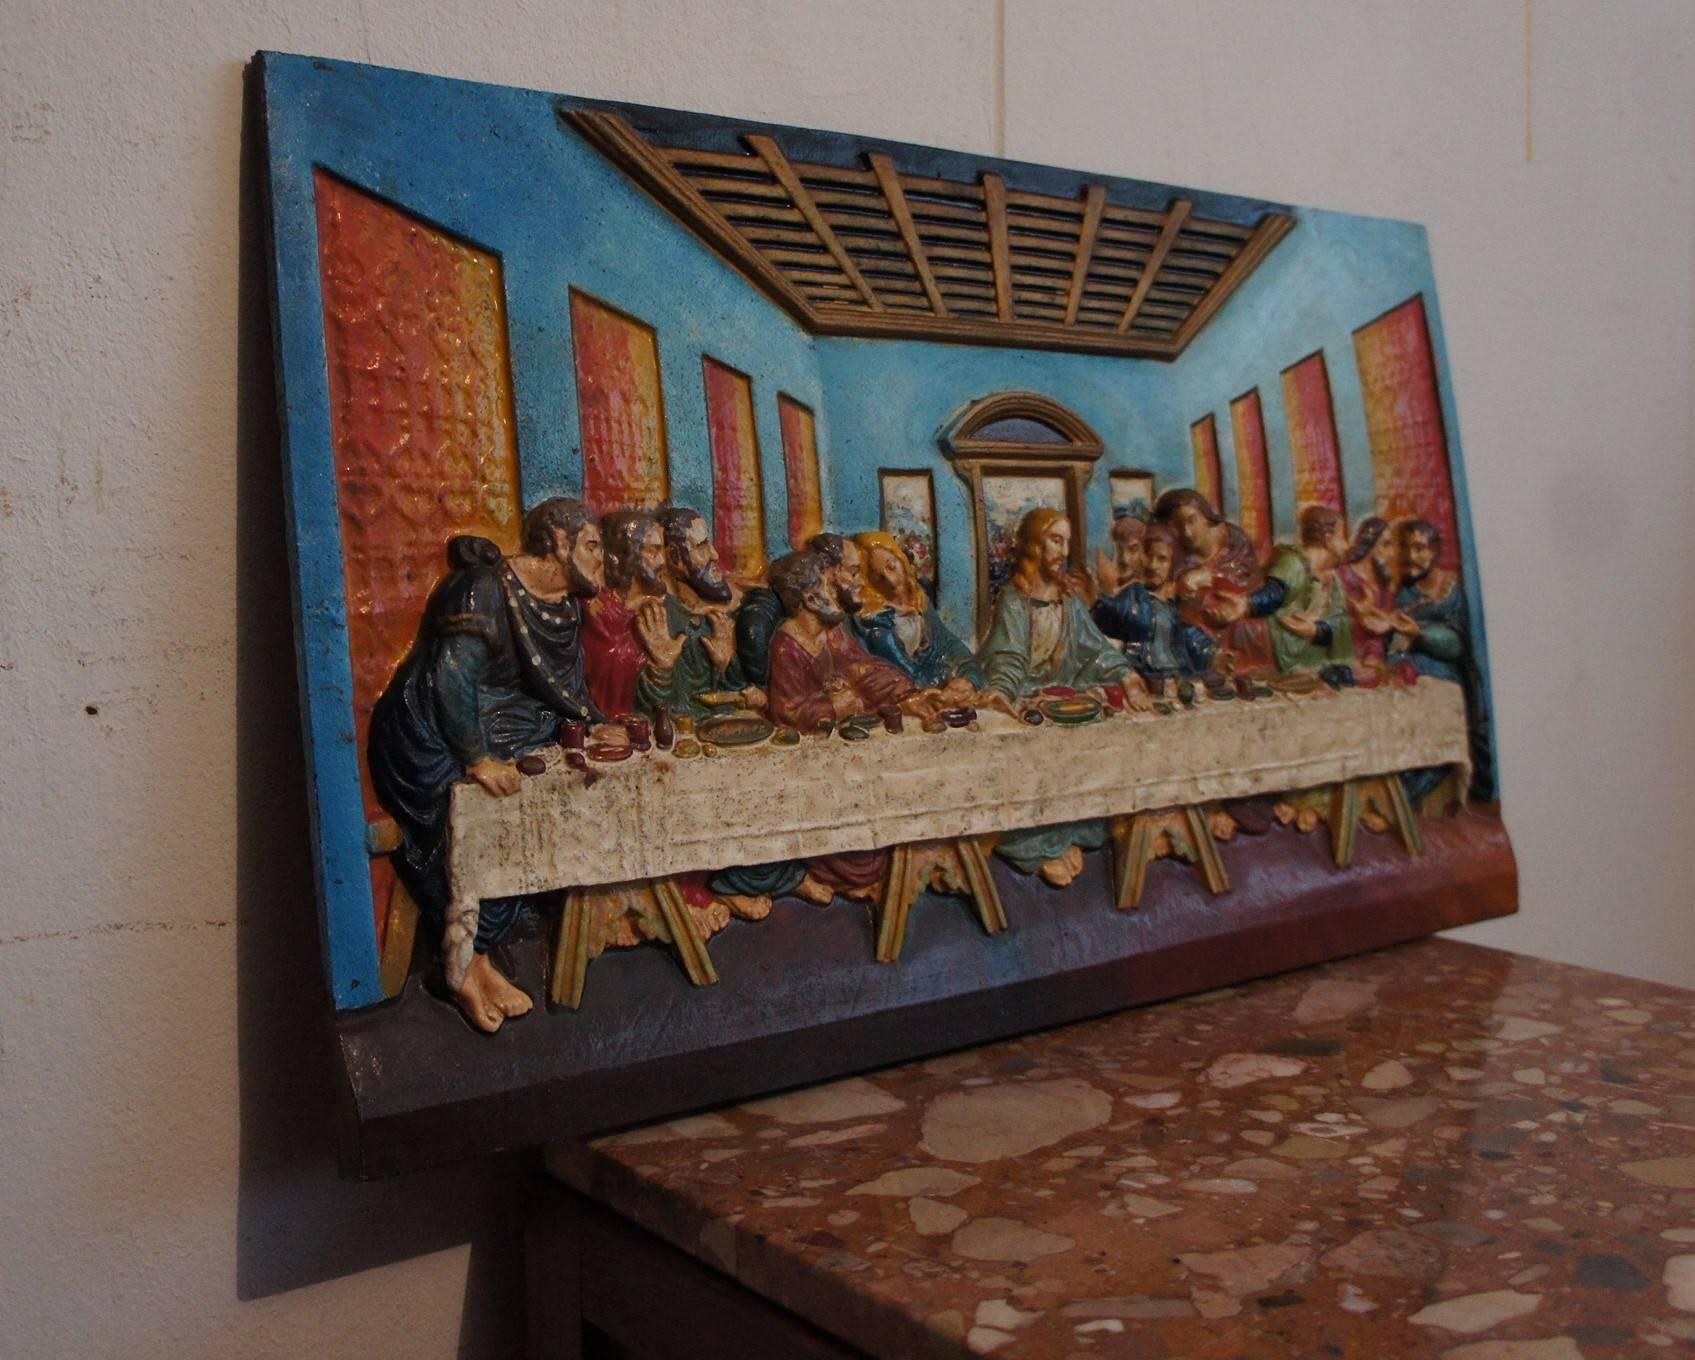 Meaningful and decorative work of religious art.

This hand-painted, cast iron replica of the world famous fresco by Leonardo da Vinci is in excellent condition. This Renaissance style work of religious art was definitely made to last and it is a